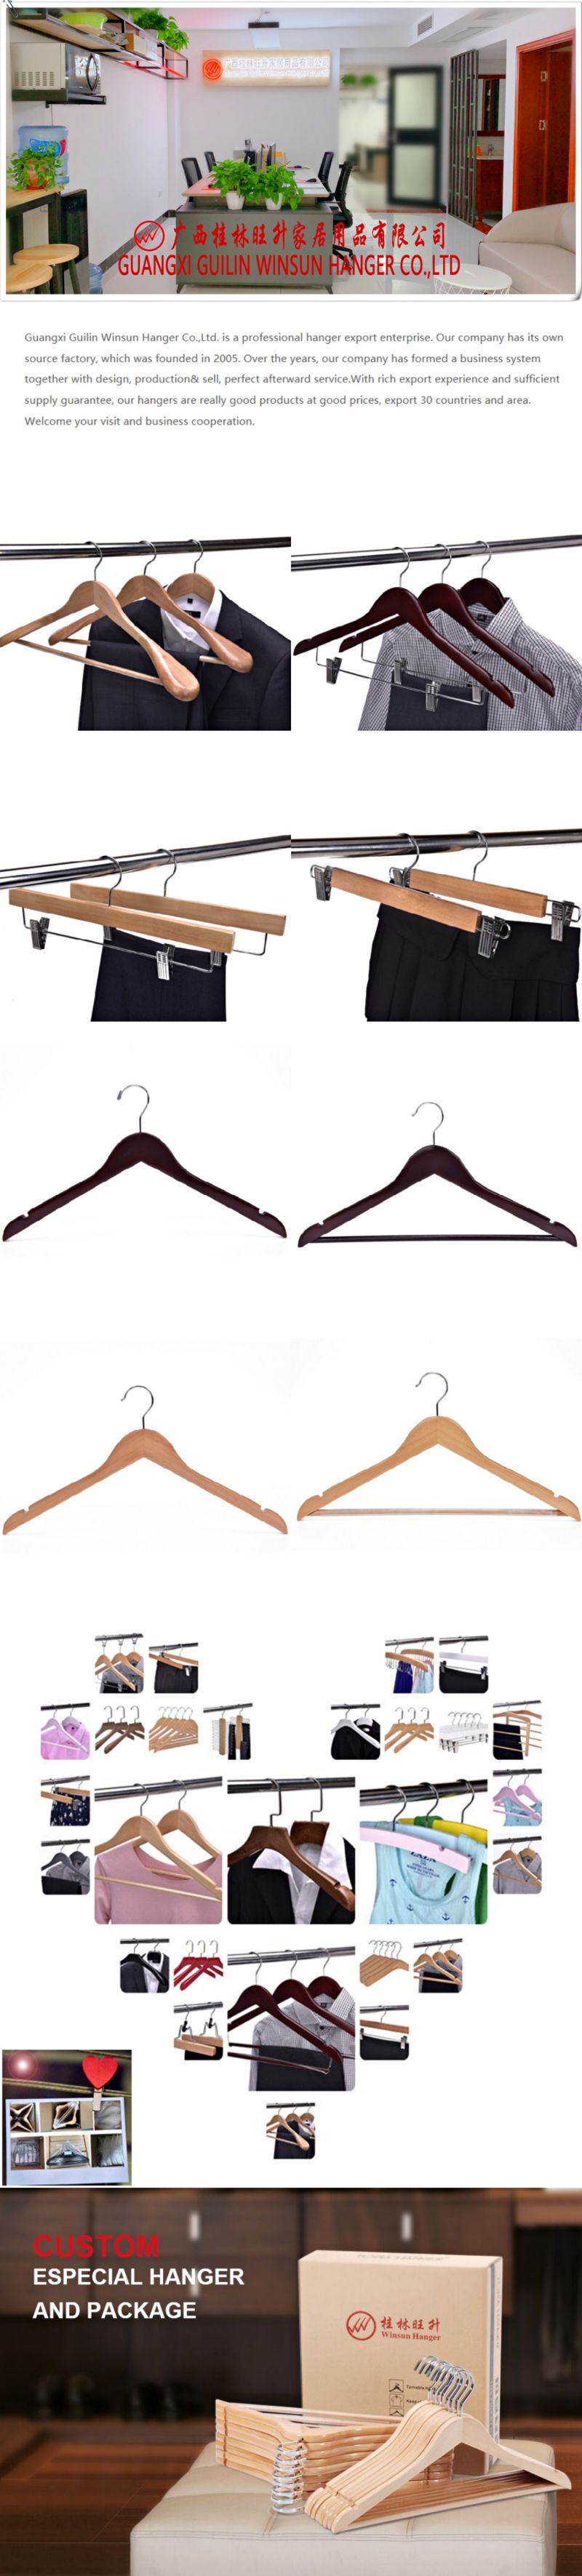 Home Rack Metal Clip Hanger Clothes Multifunctional Wooden Hanger with Clips